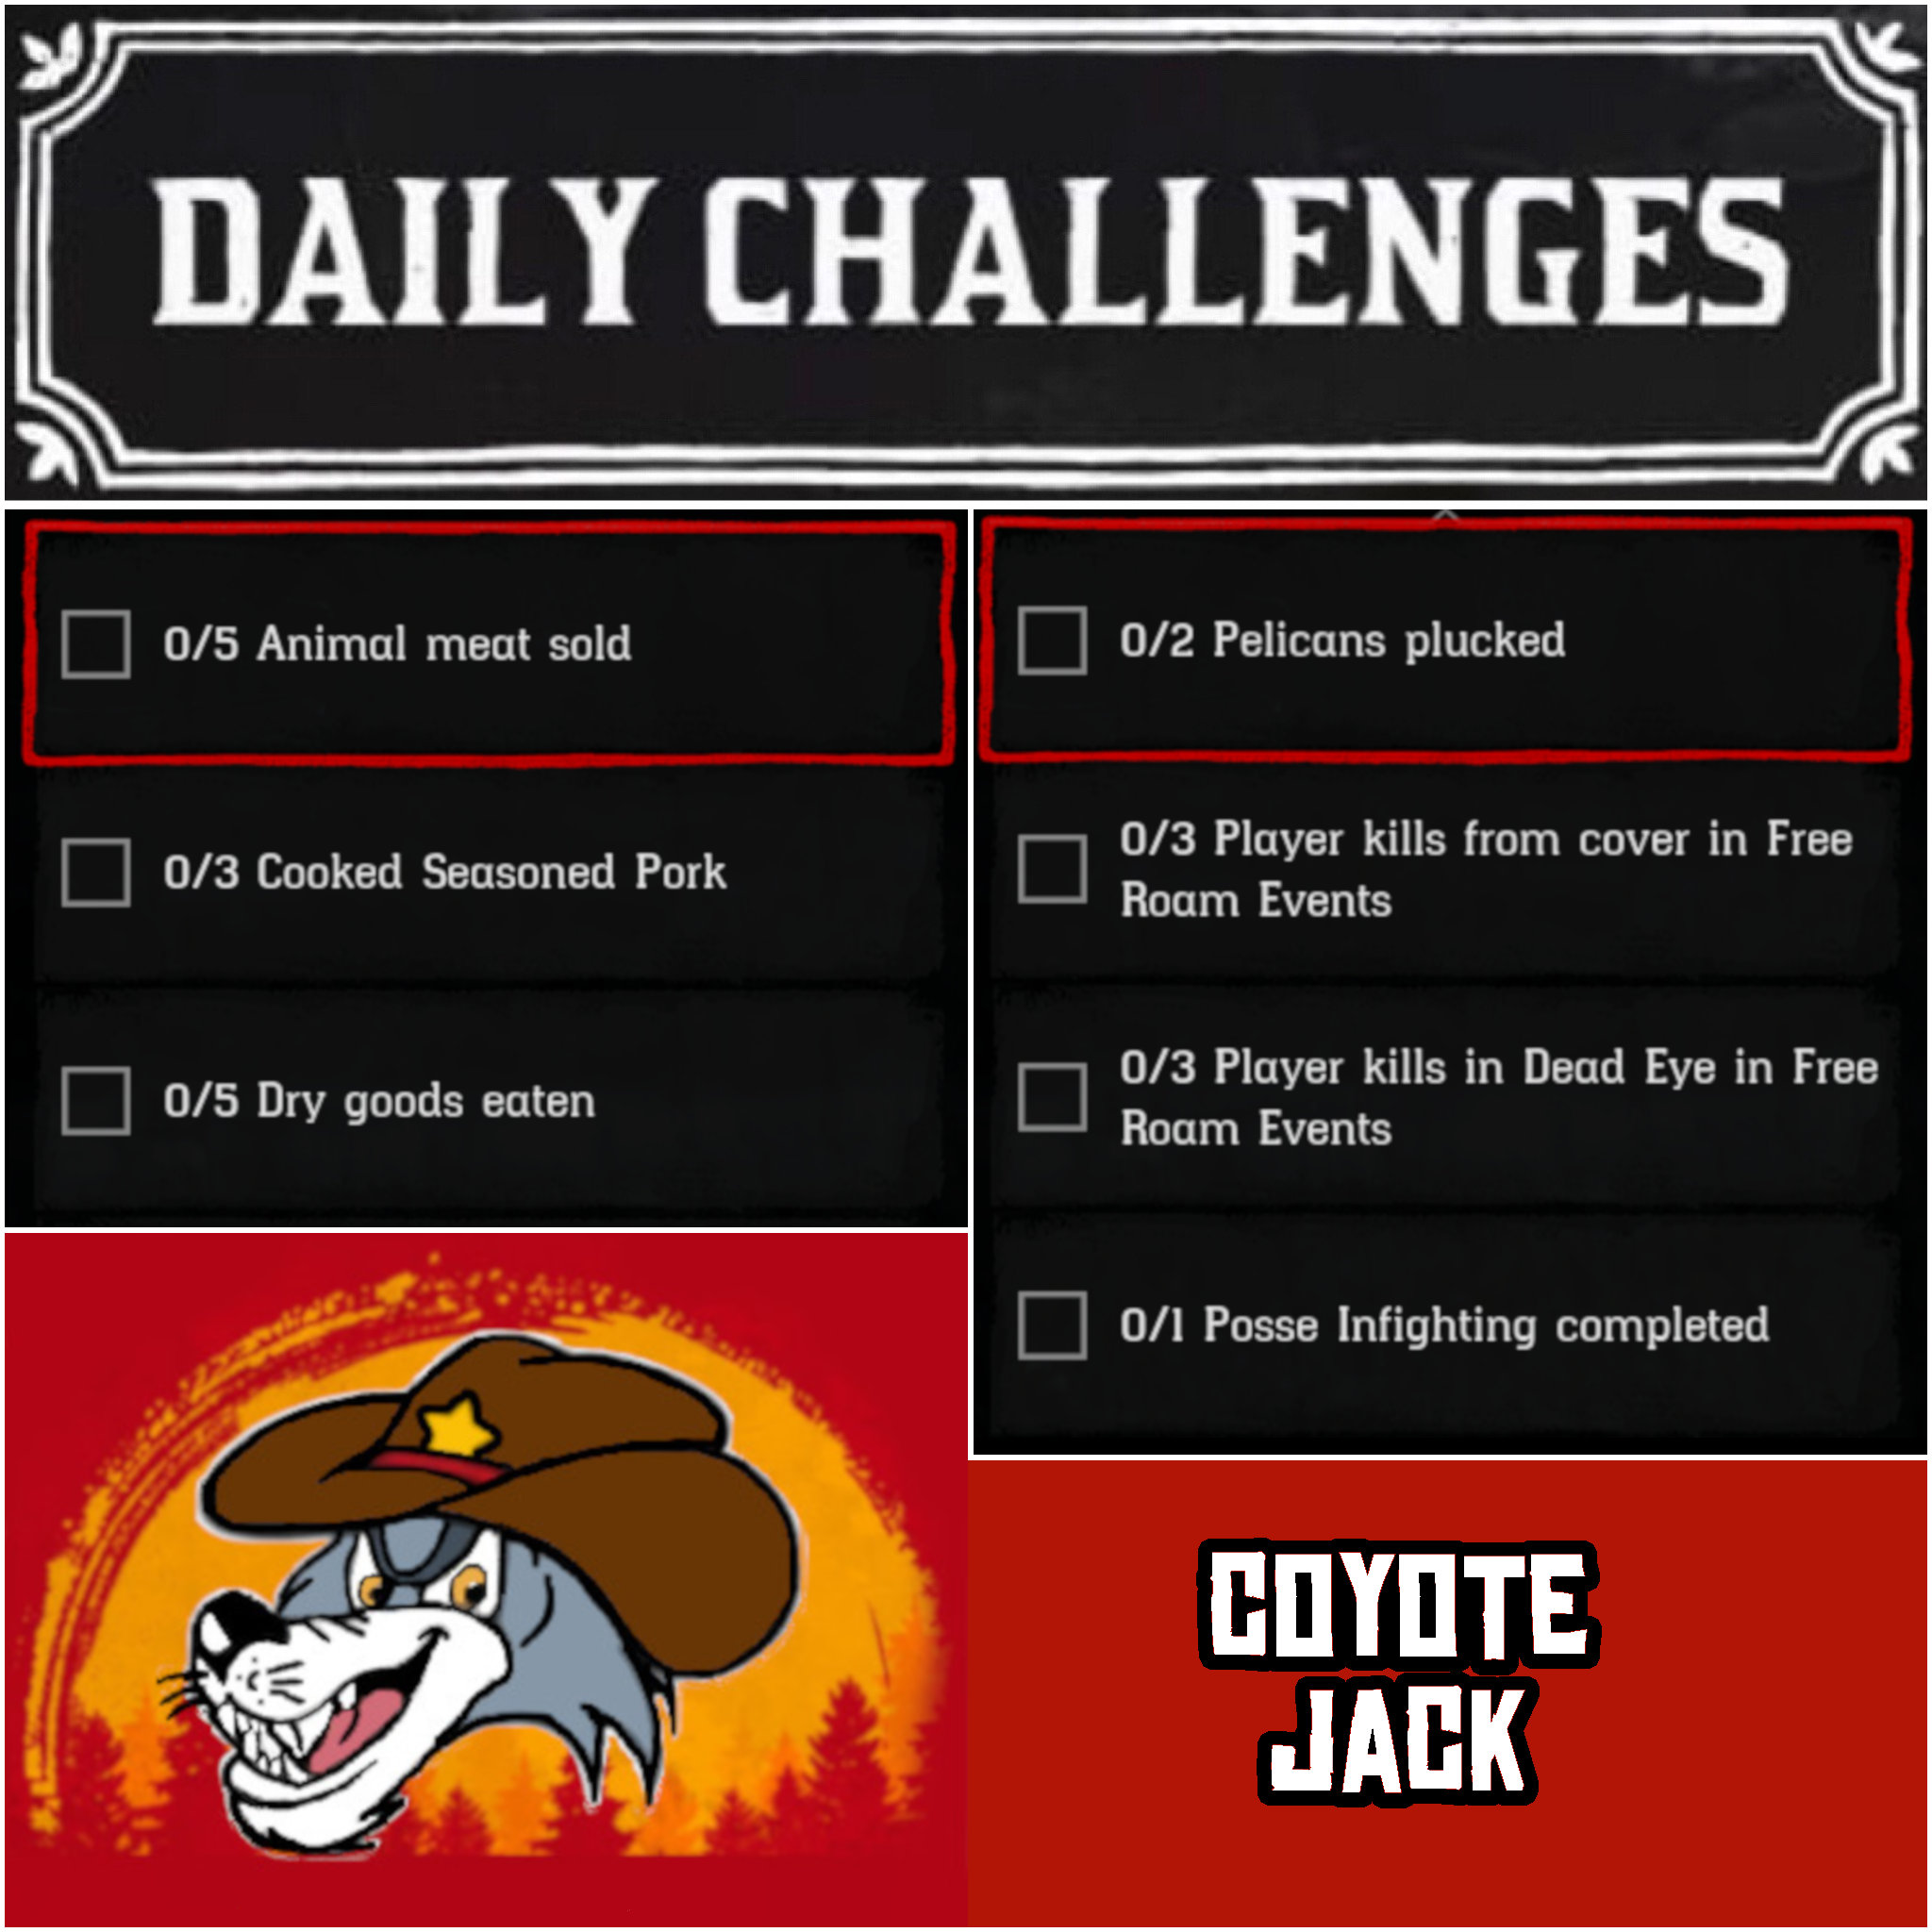 You are currently viewing Wednesday 18 November Daily Challenges